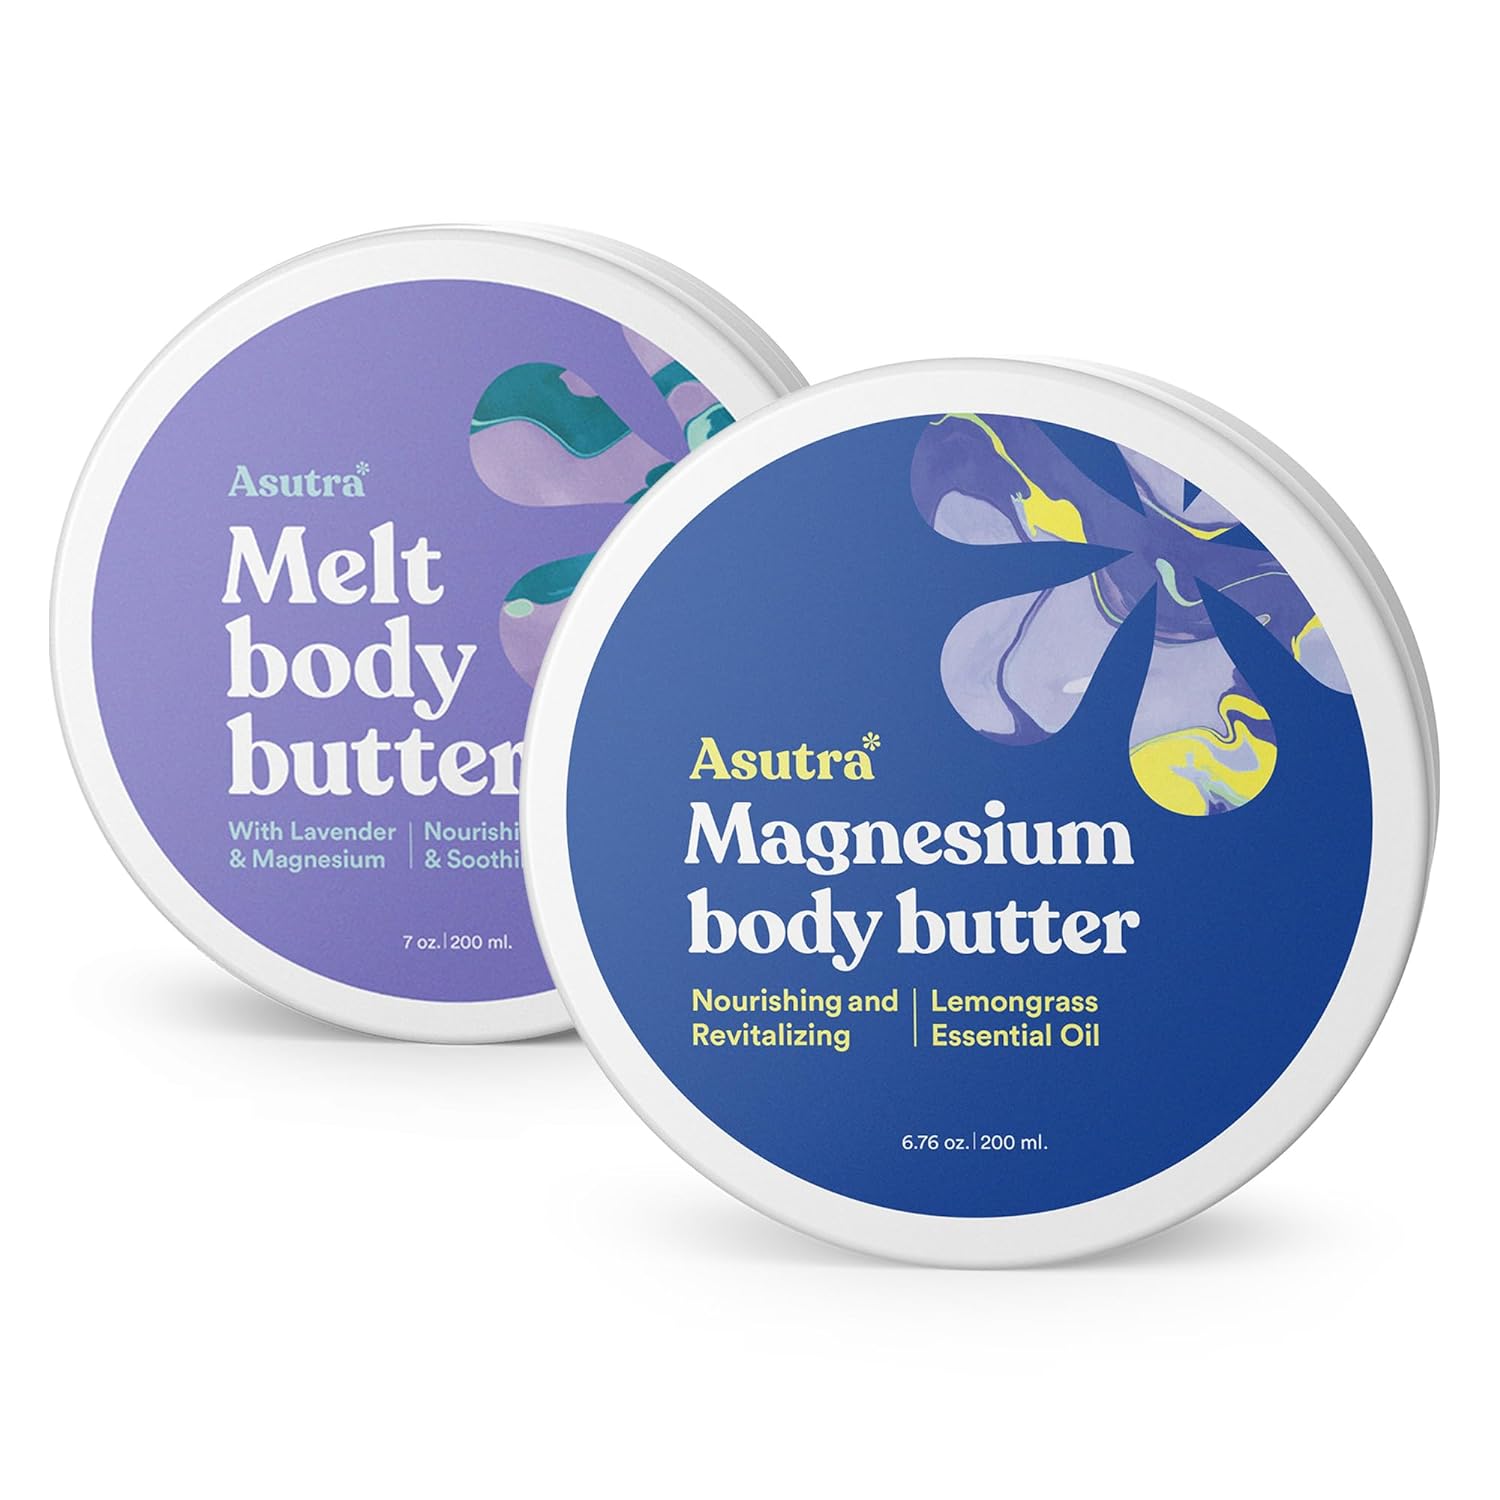 ASUTRA Lavender Magnesium Body Butter Bundle - Natural, Vegan, and Cruelty-Free Moisturizer for Sensitive & Dry Skin (13.52 oz, Set of 2)